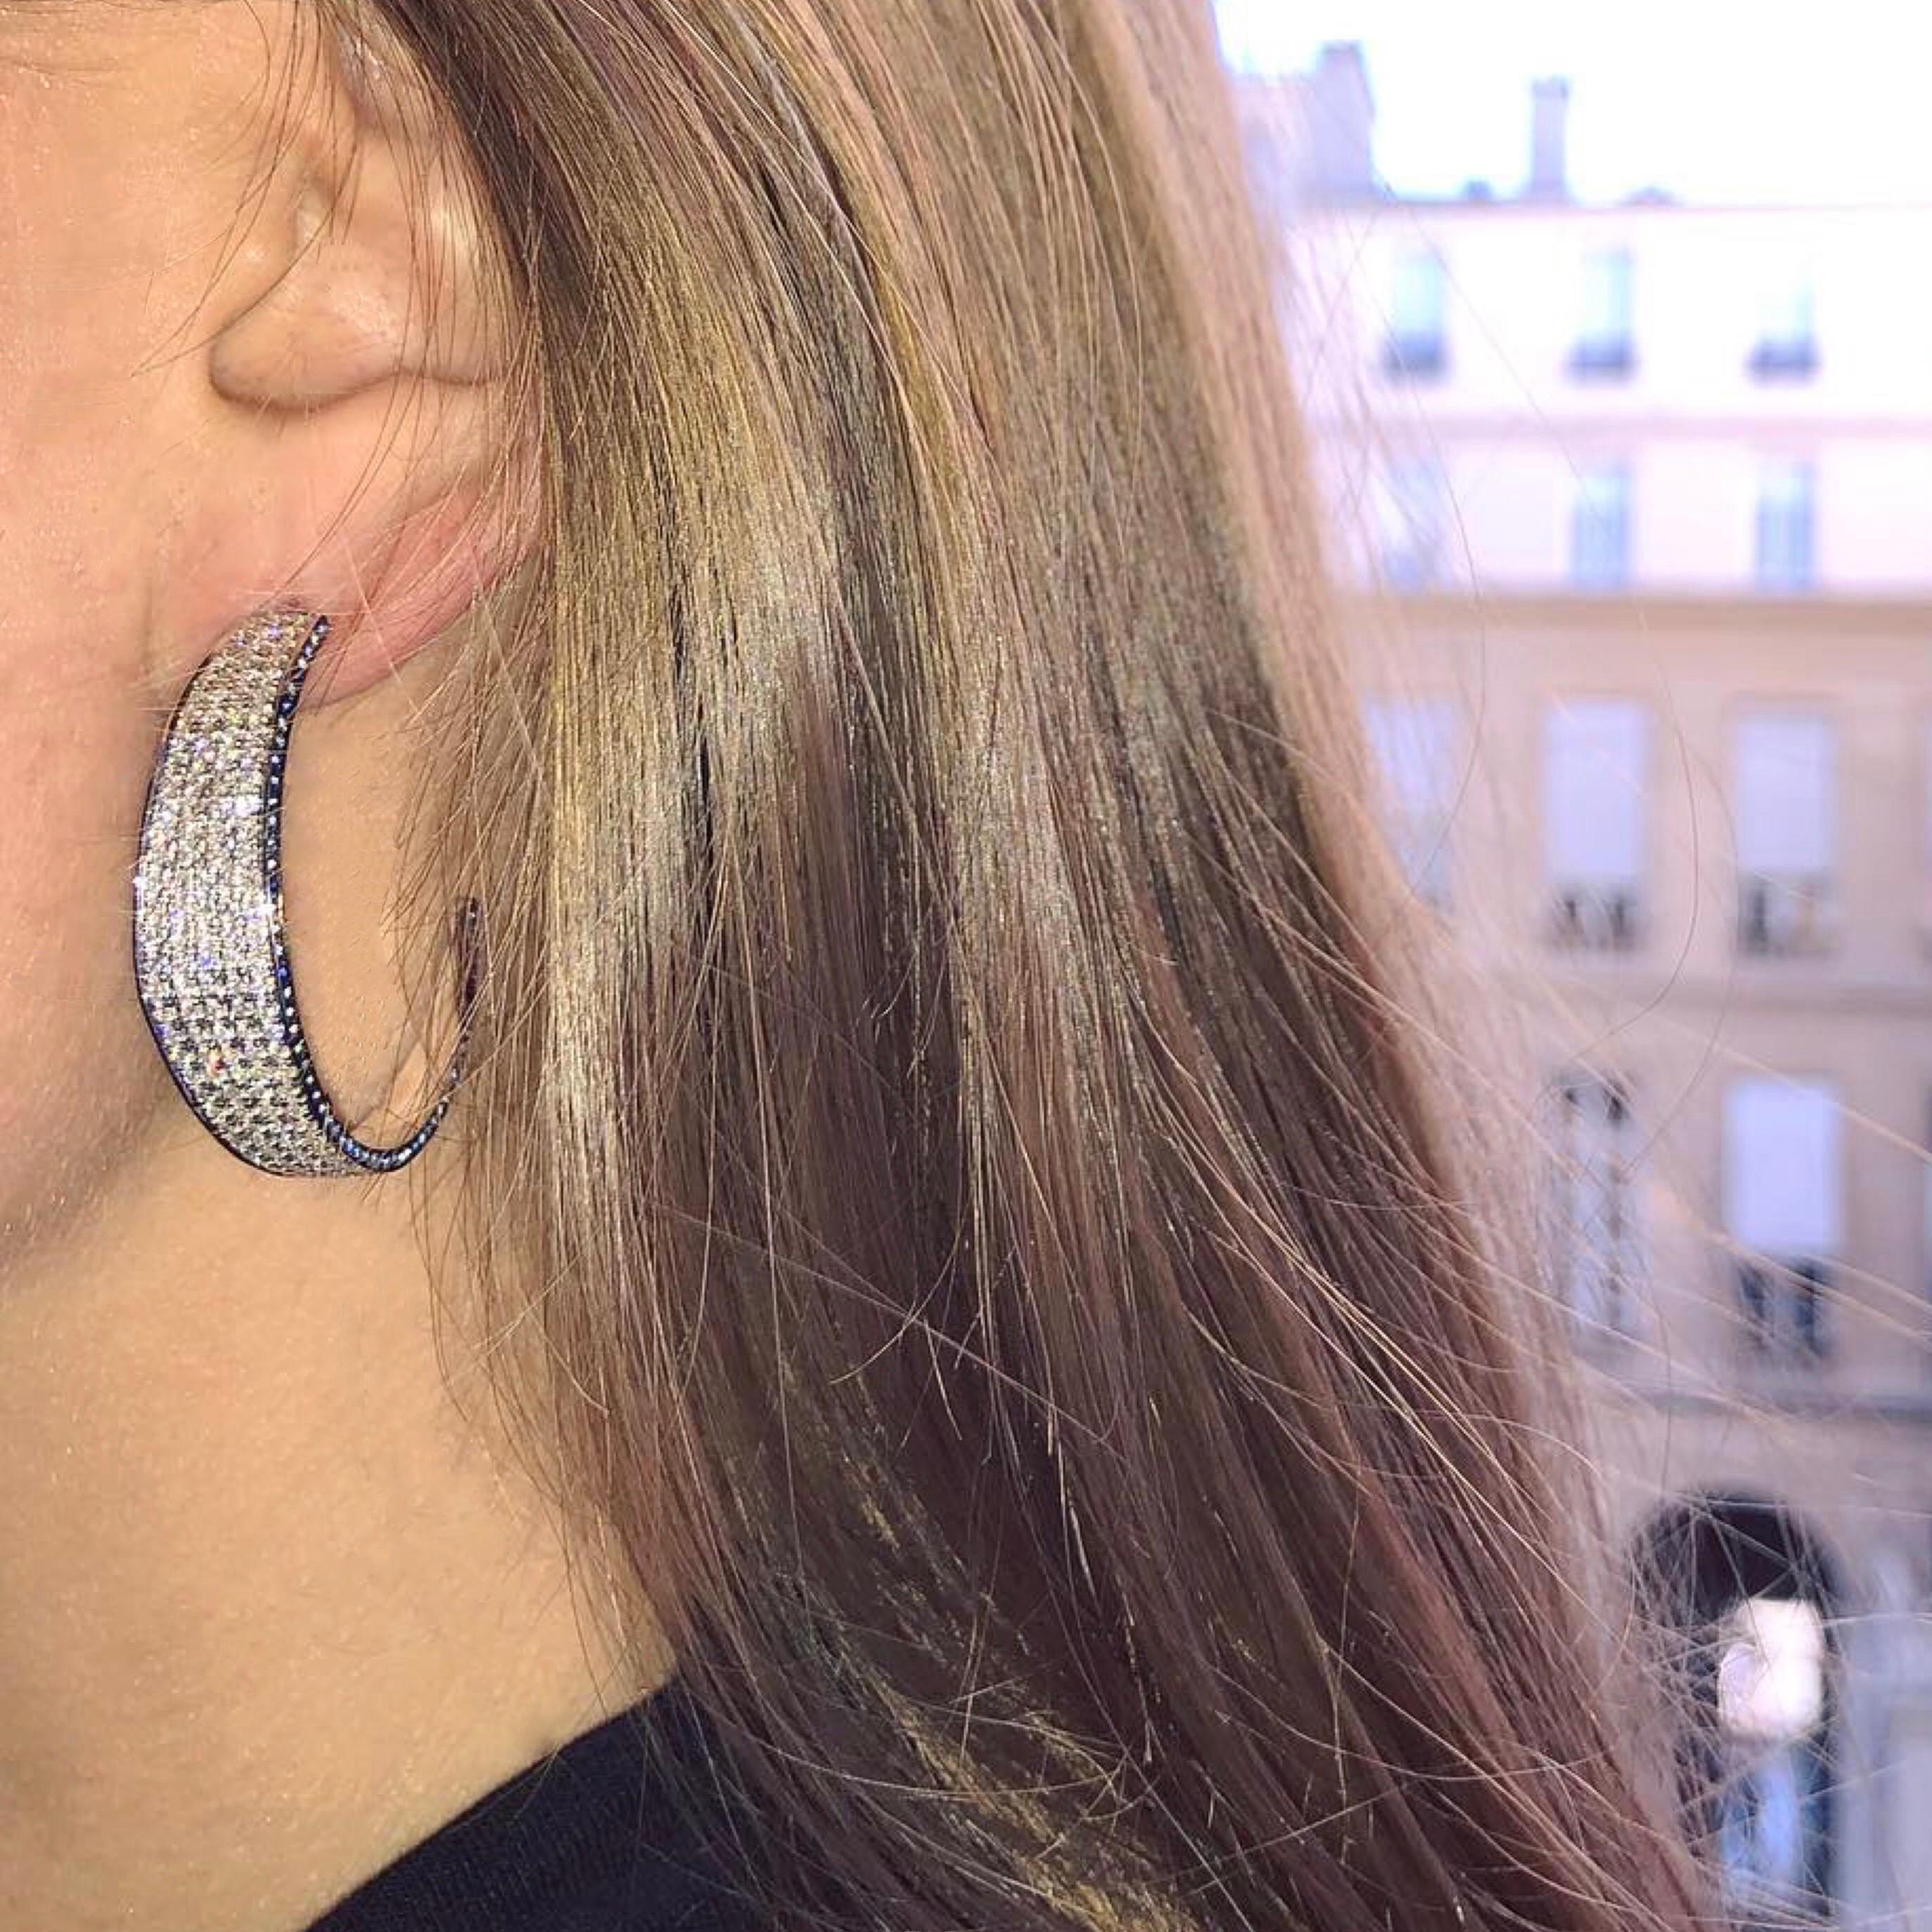 18kt white gold hoops with diamonds and sapphires from Ralph Masri's Modernist collection, inspired by mid-century Modernist architecture with an emphasis on minimalist shapes and silhouettes.

Available in yellow, rose or white gold.

Push backs